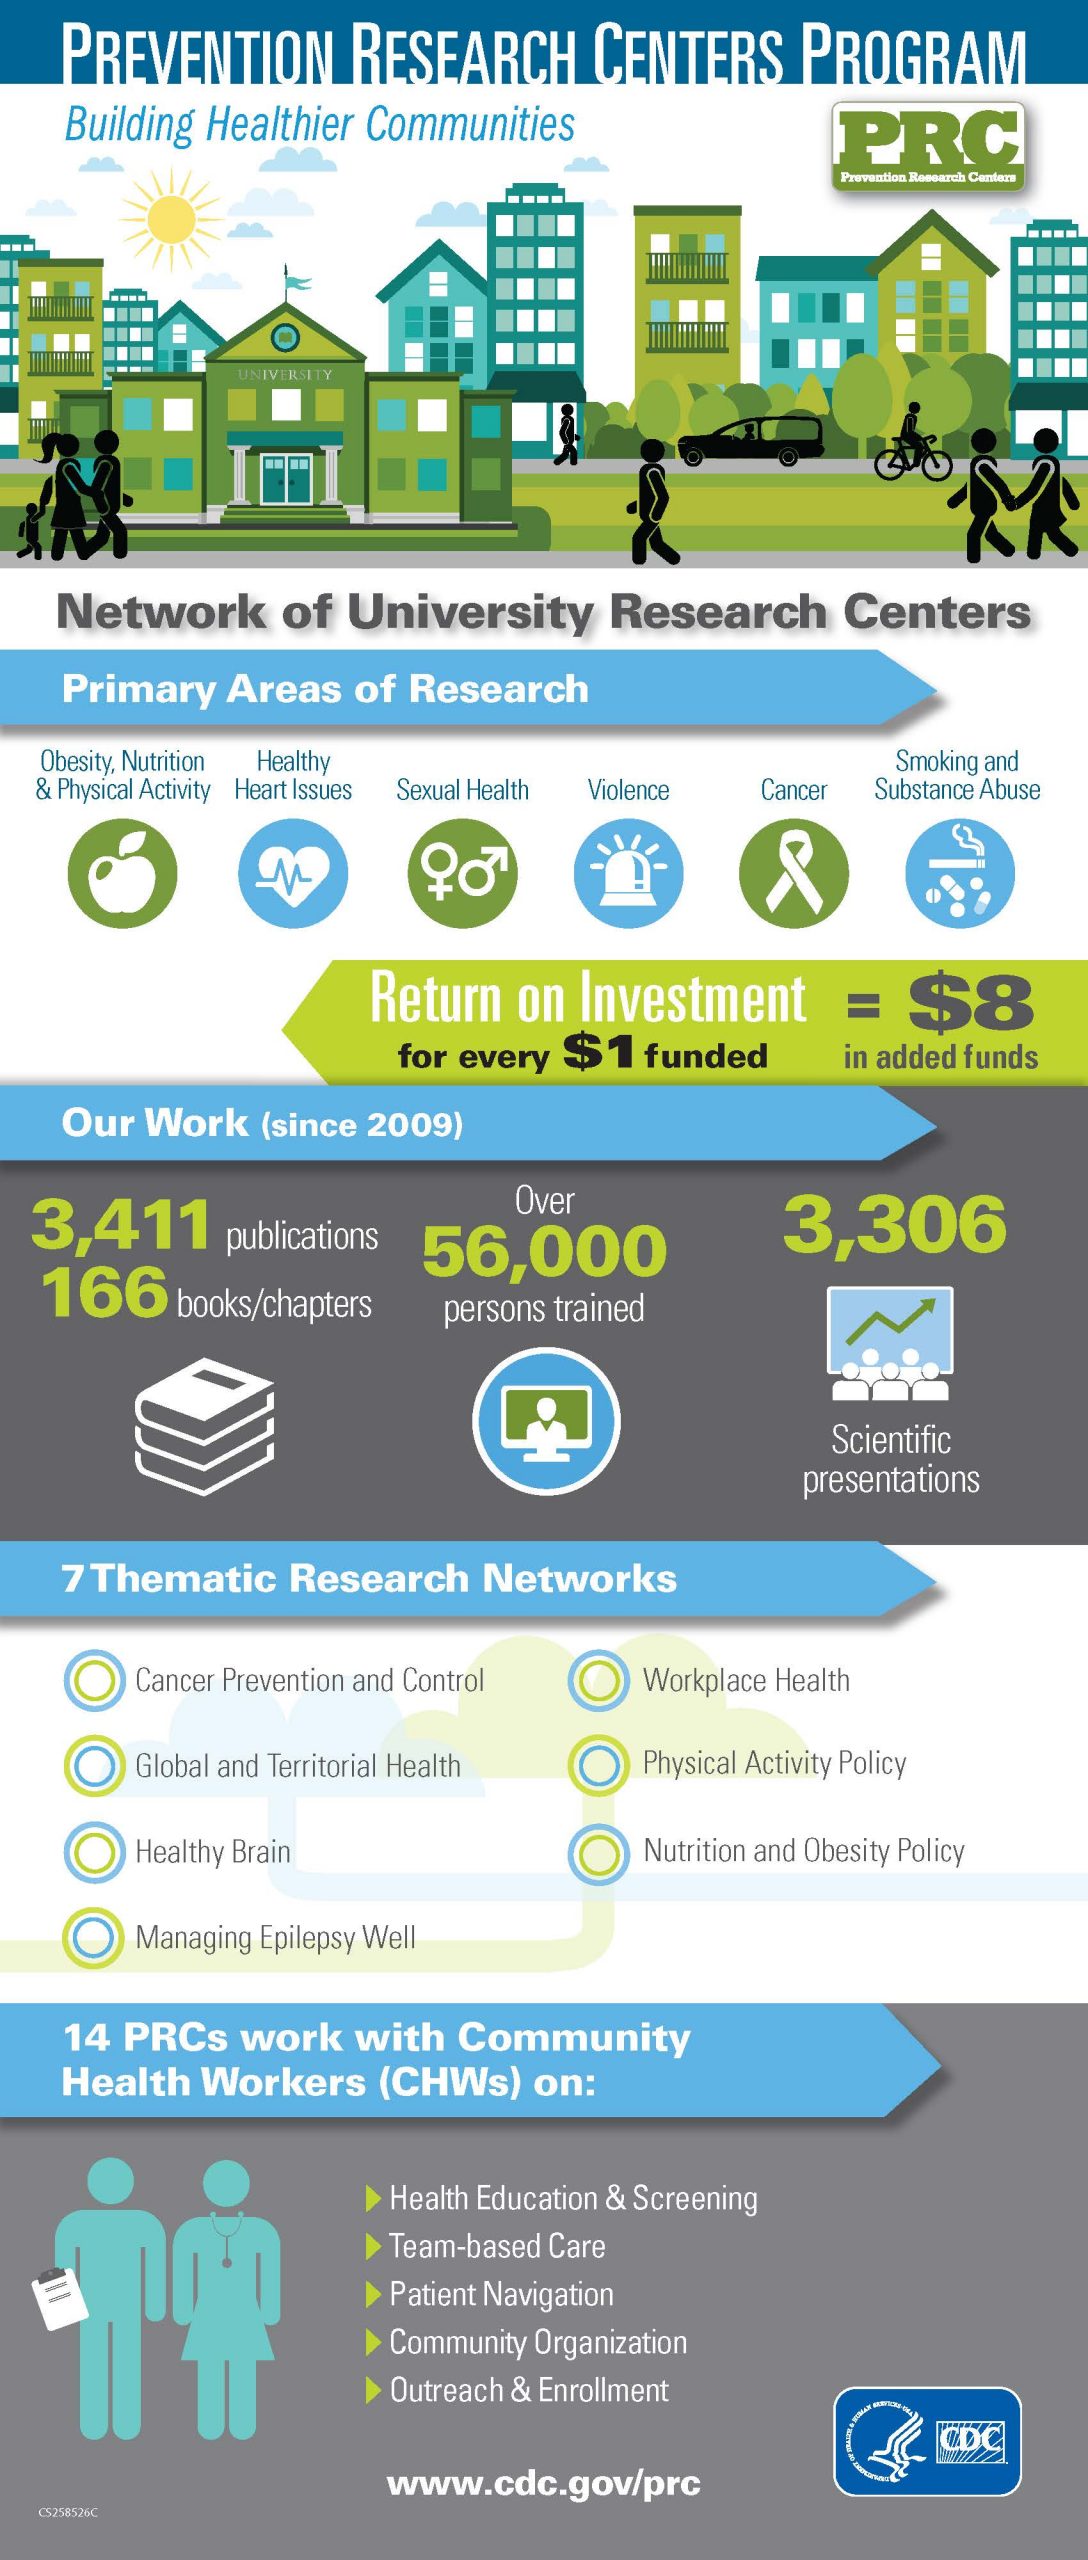 Infographic highlighting 30 years of prevention research